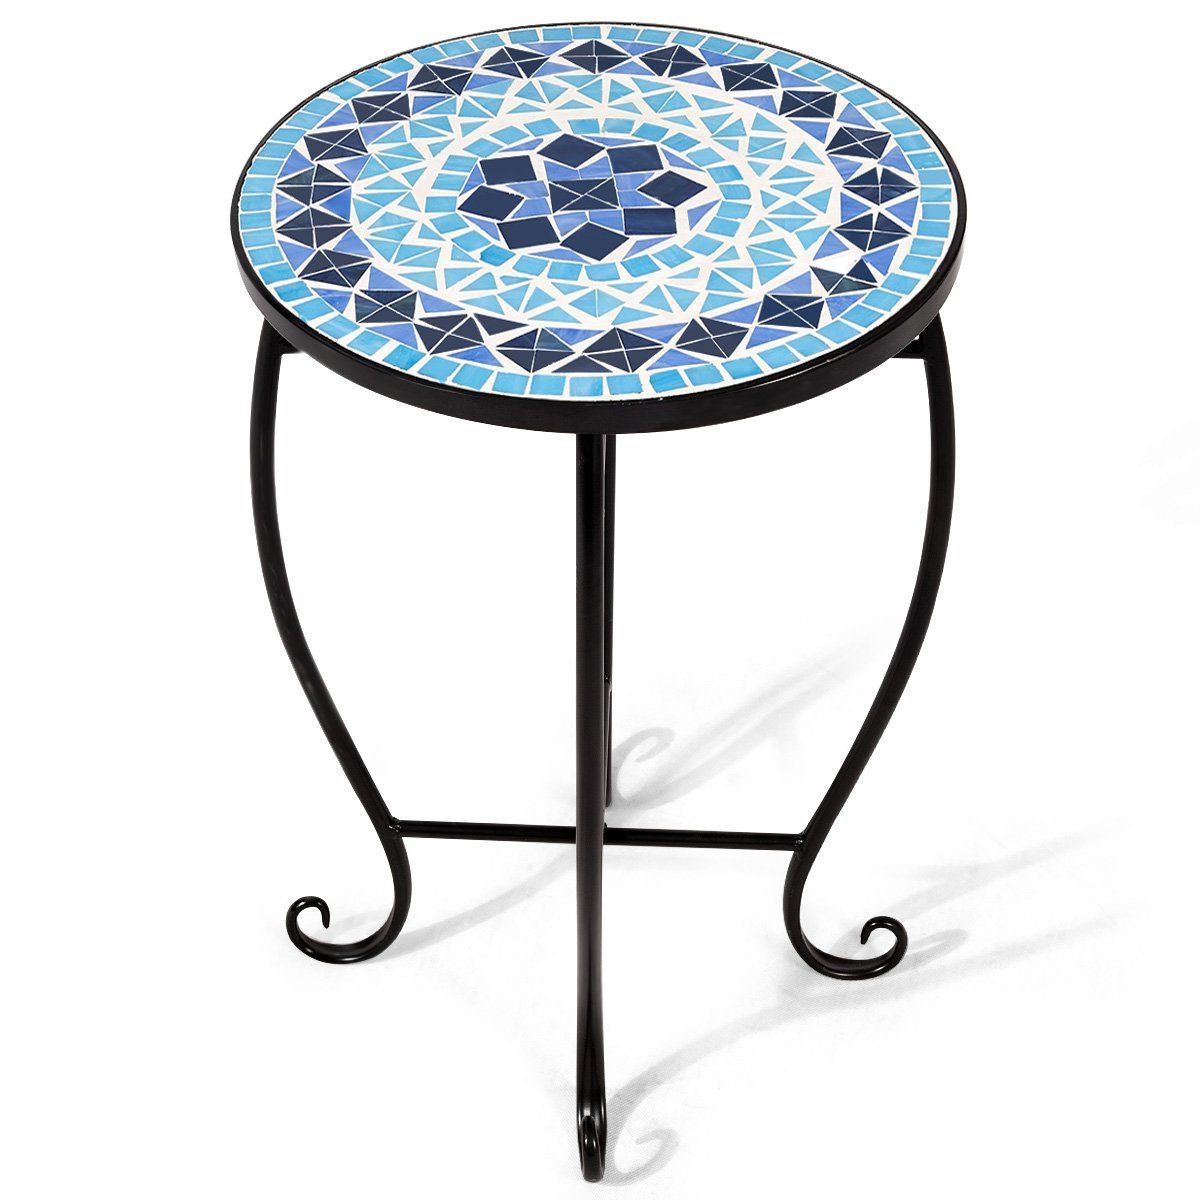 Mosaic Round Side Table Patio (ocean Fantasy) Inside Best And Newest Mosaic Tile Top Round Side Tables (View 4 of 15)